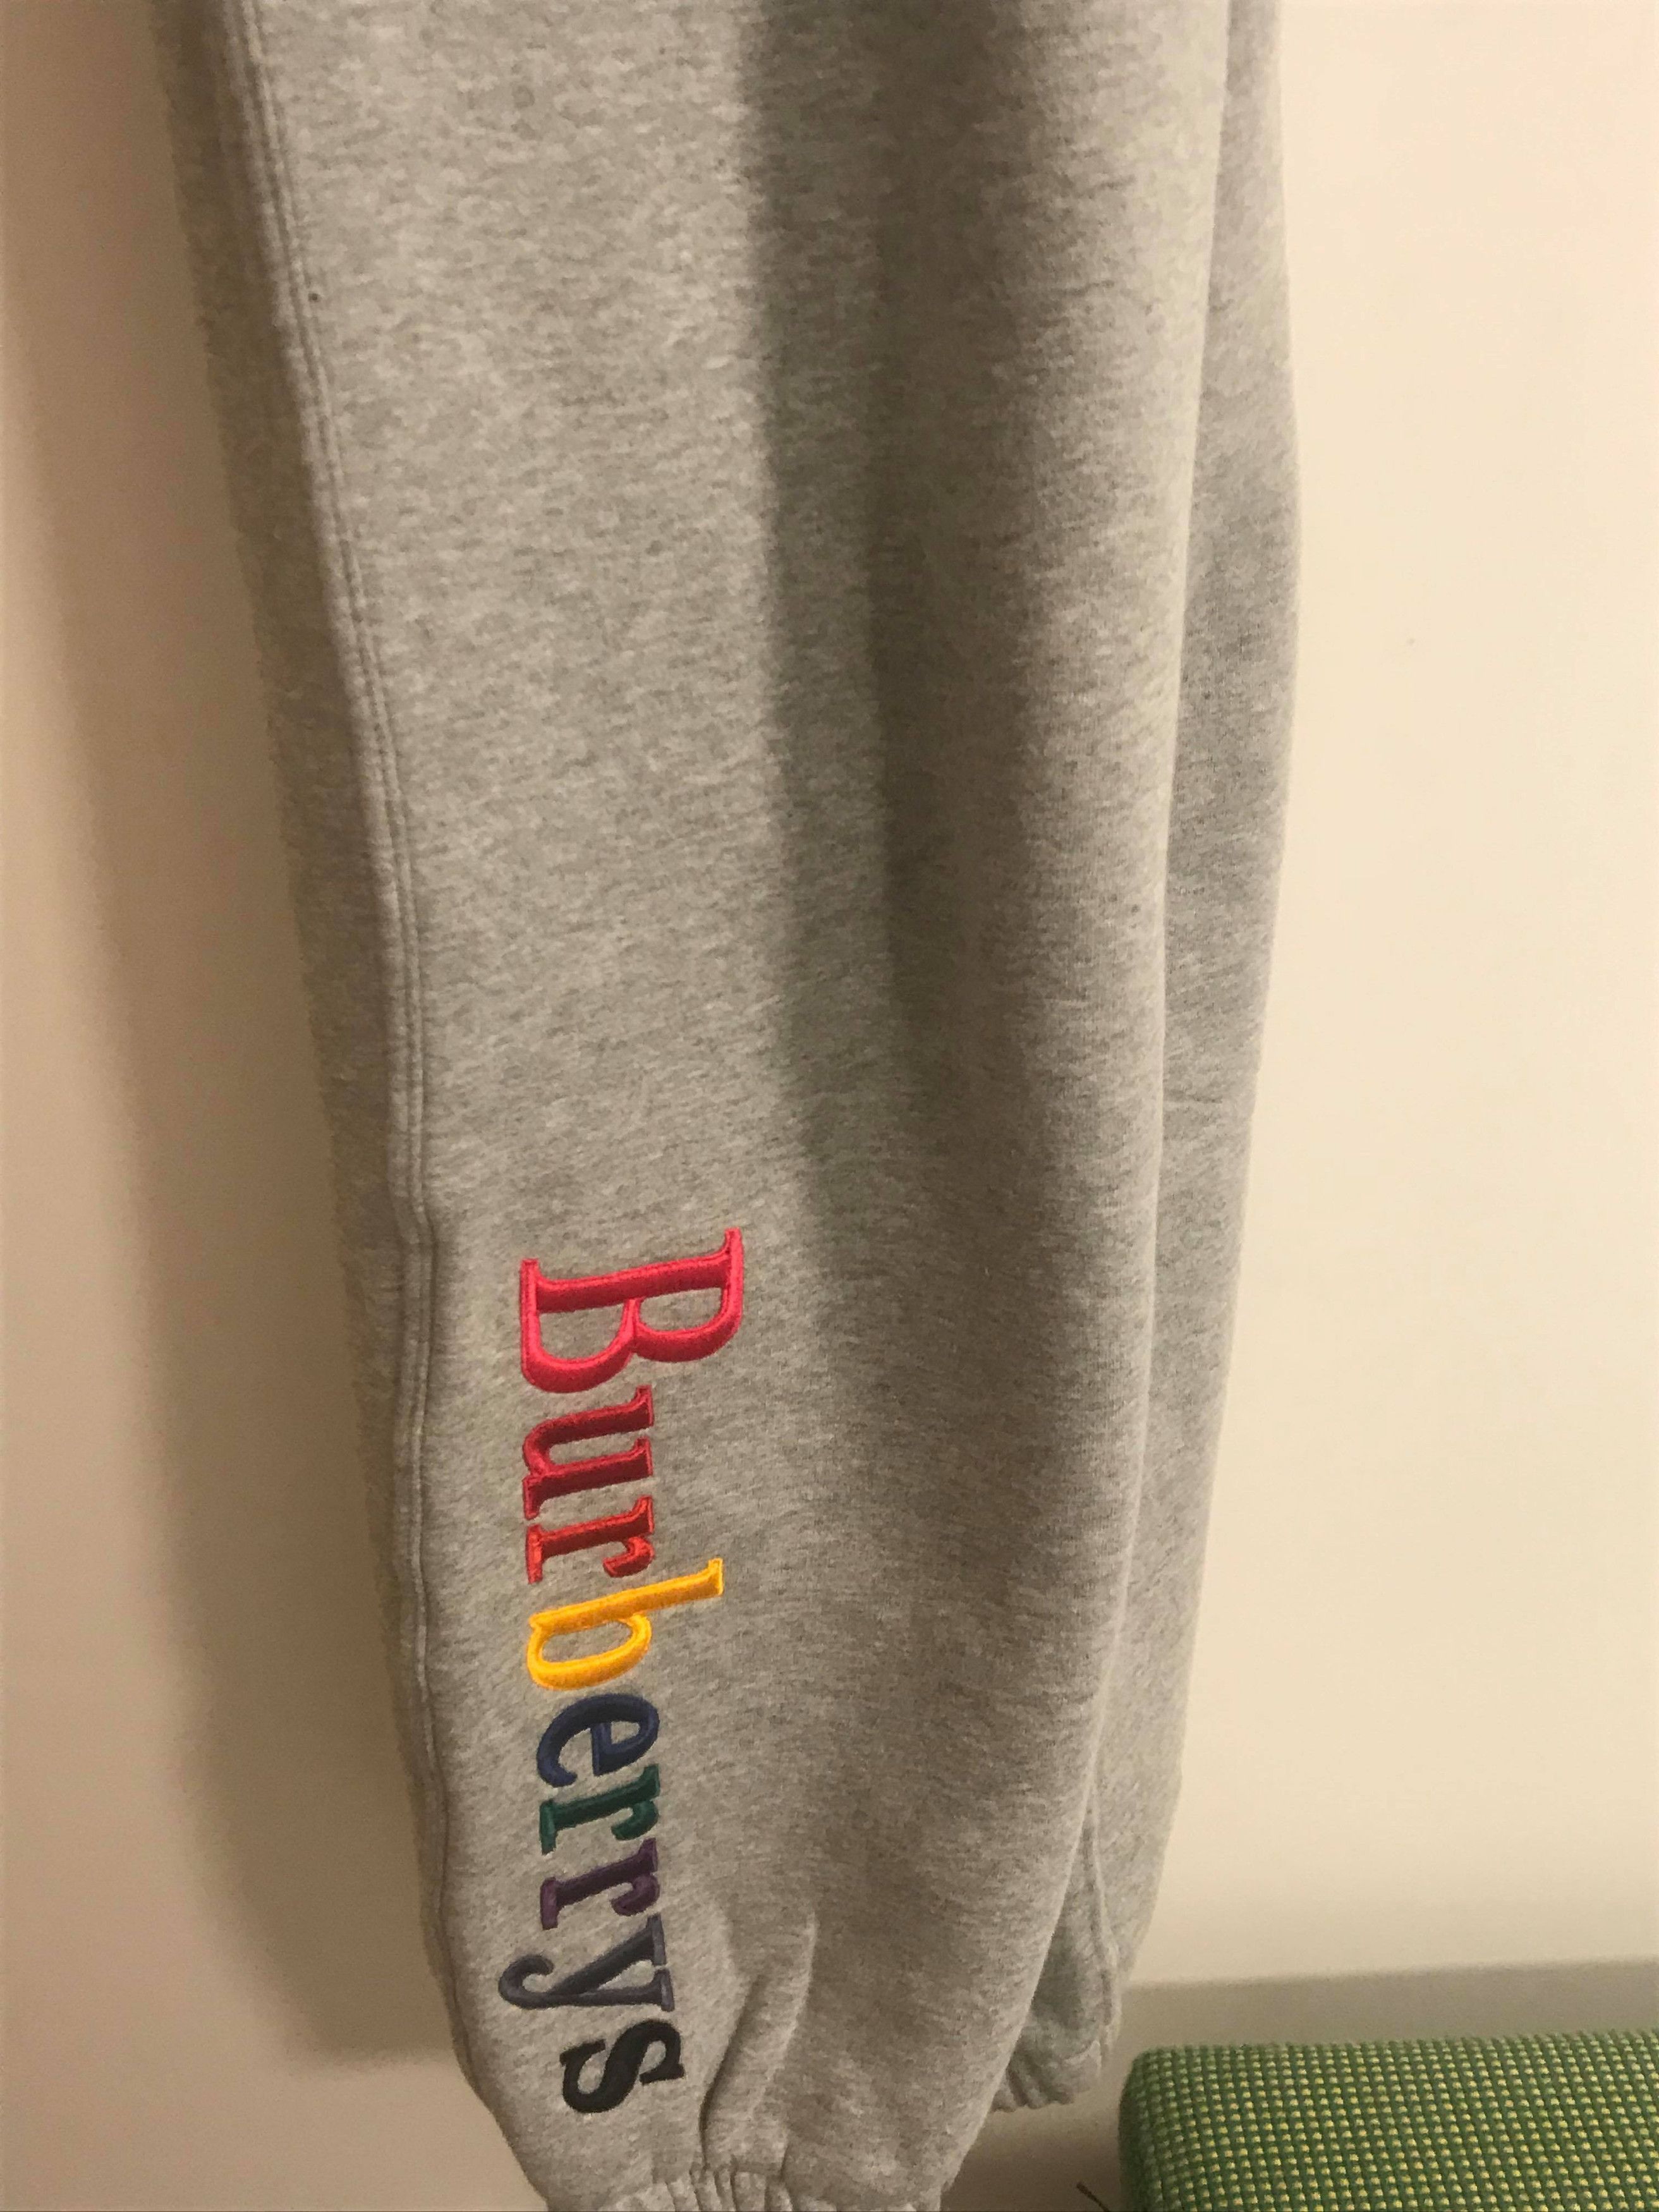 Burberry Burberry Rainbow Embroidered | Grailed